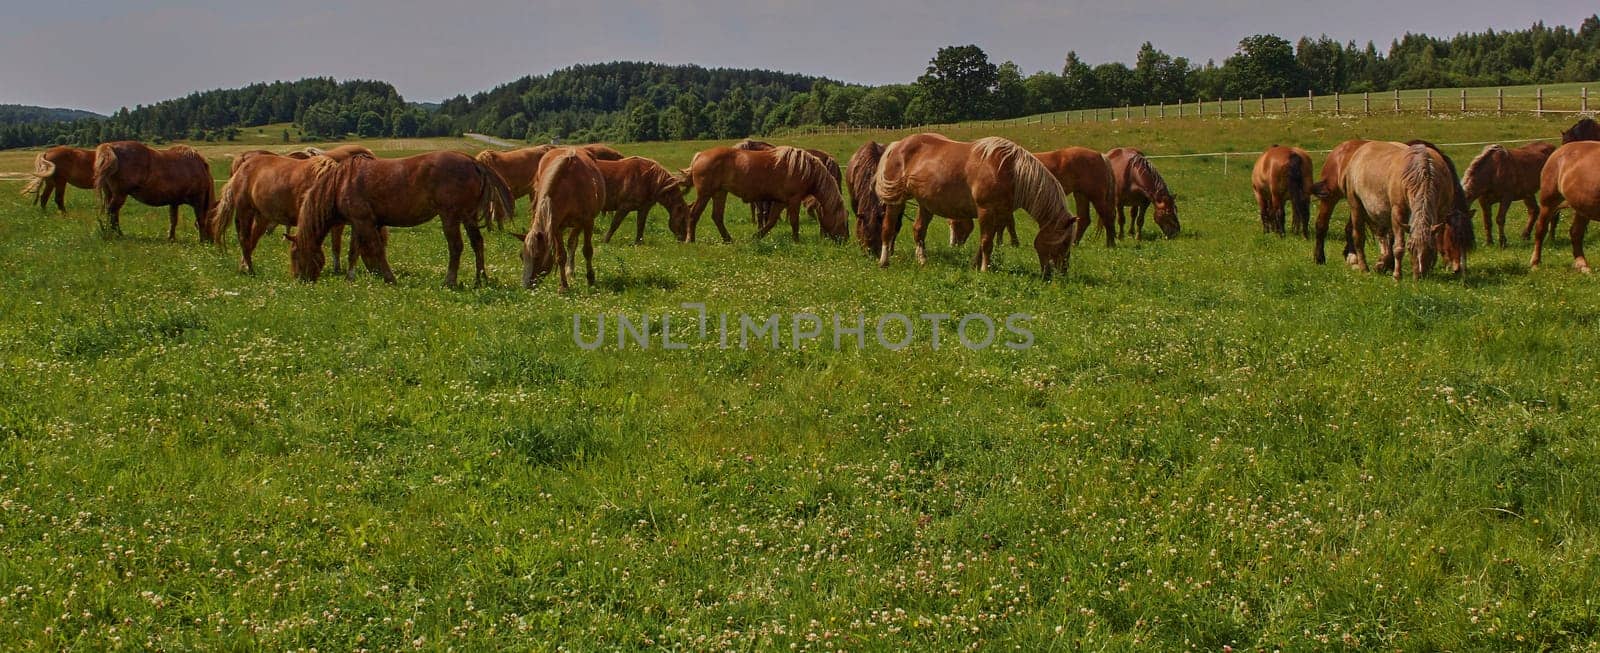 A beautiful brown horse grazes on a flowering sunny meadow in a field along with a herd of horses. by Hil